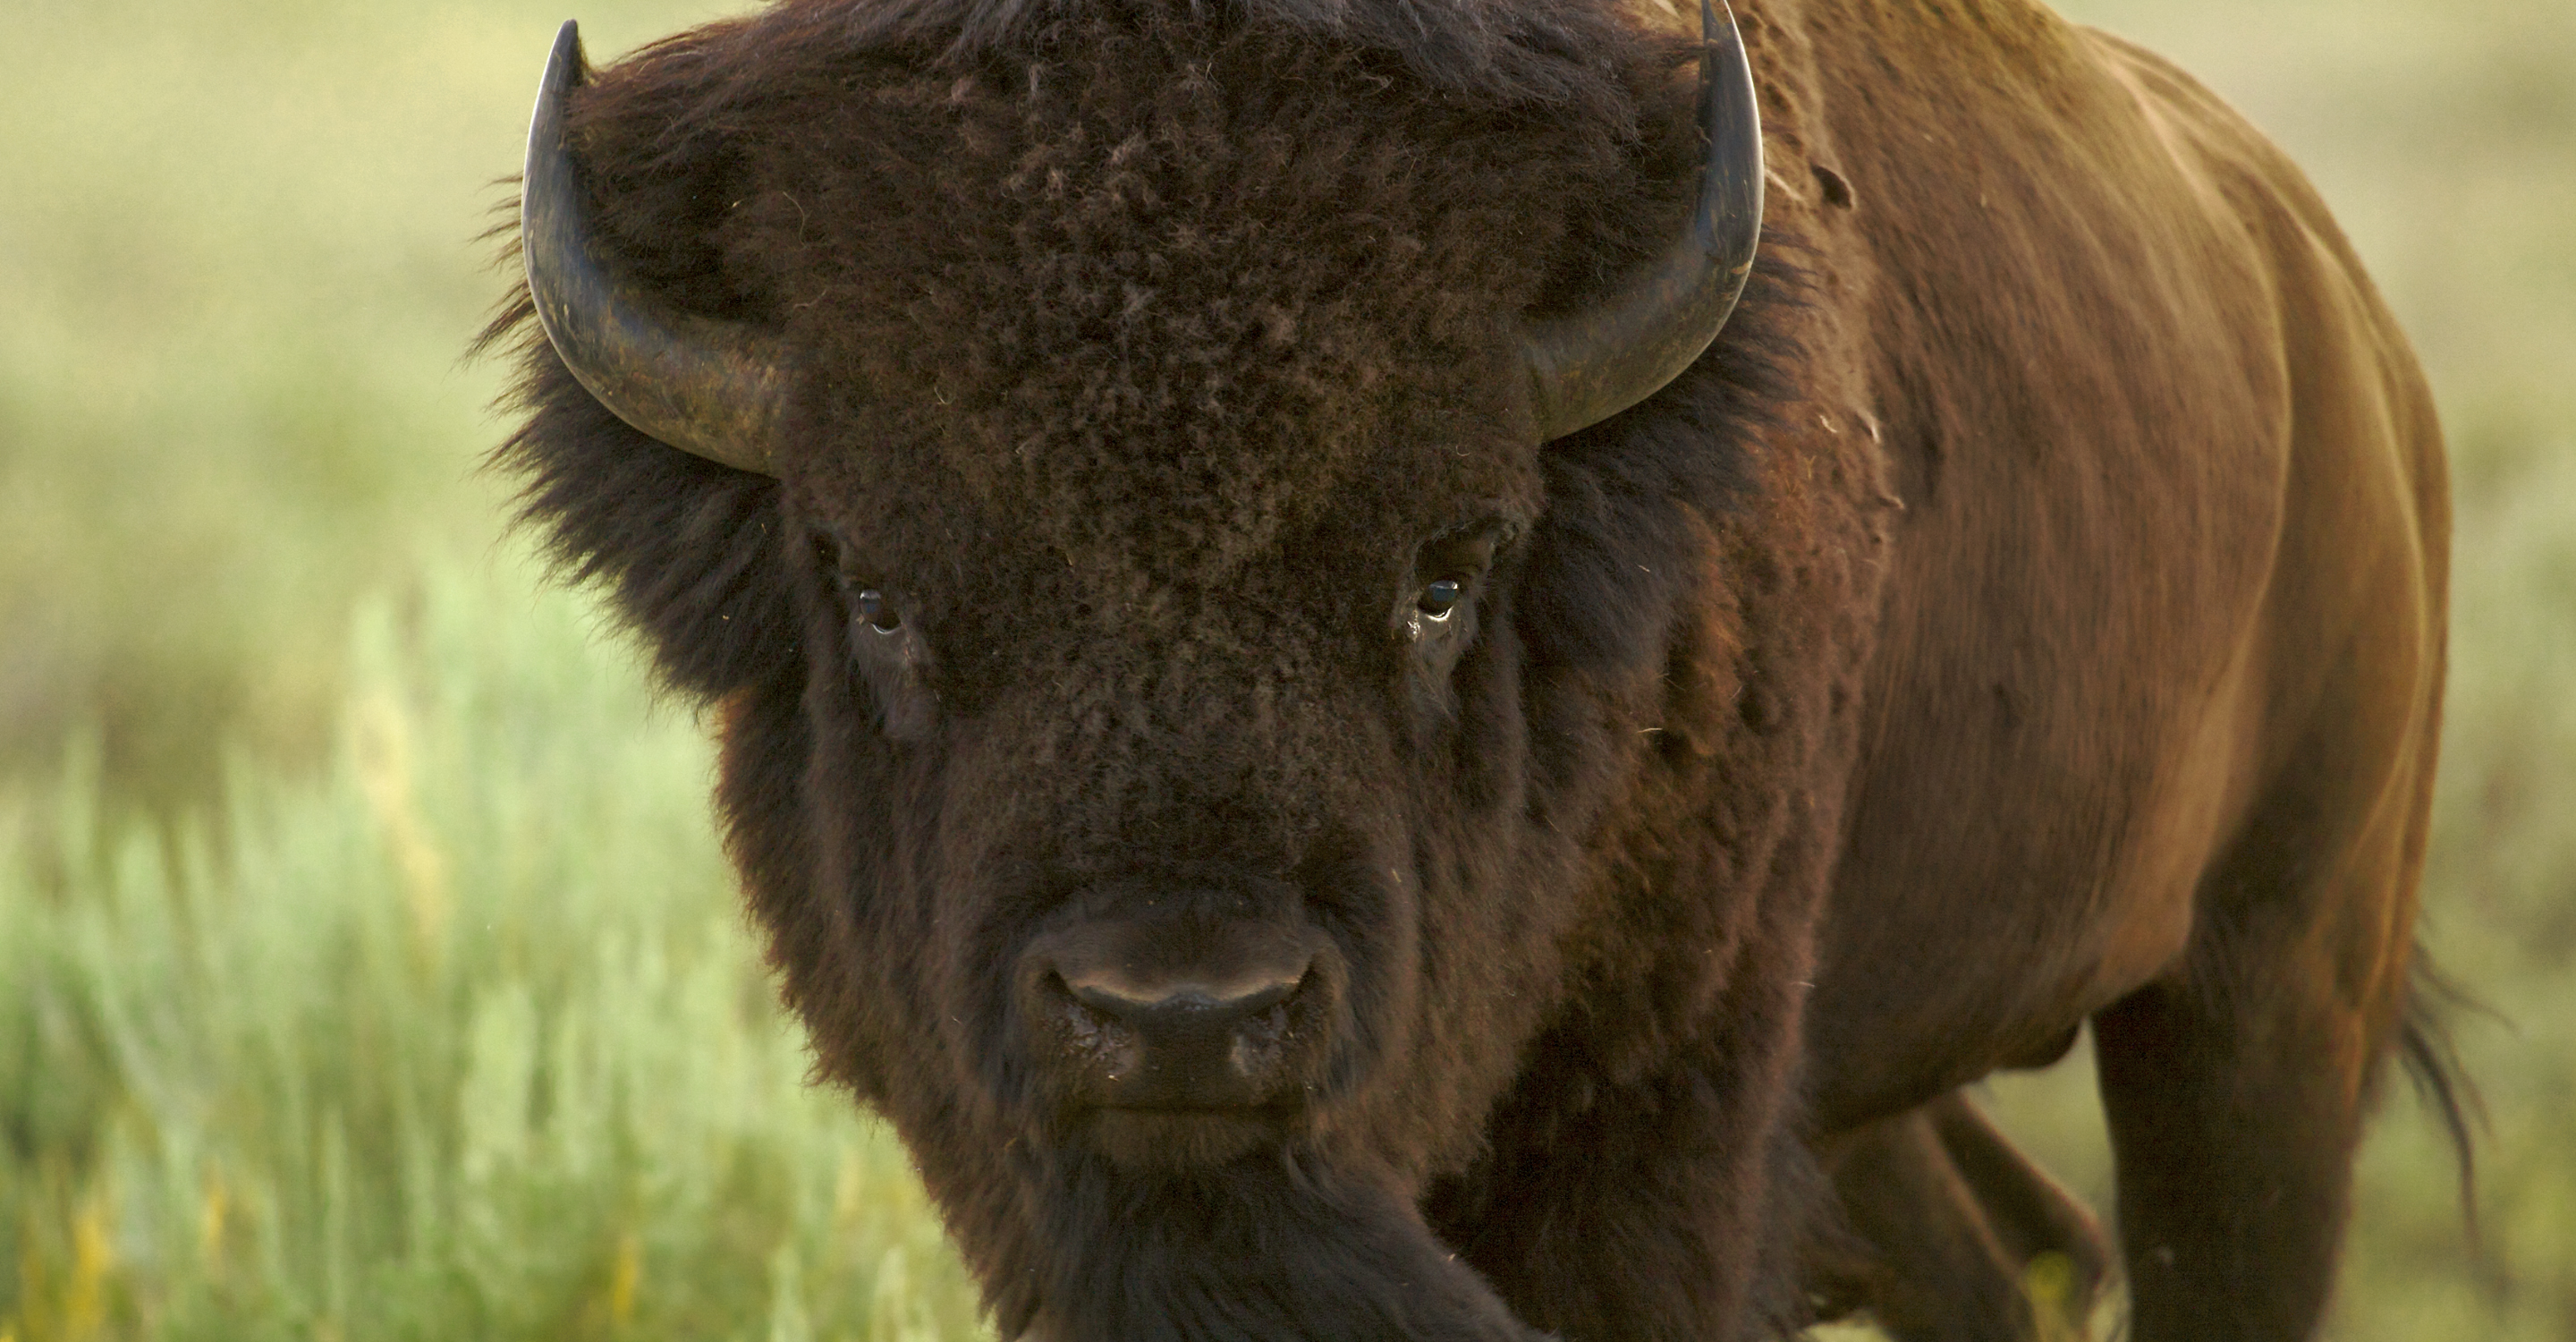 American bison stares at the camera in Yellowstone National Park, United States